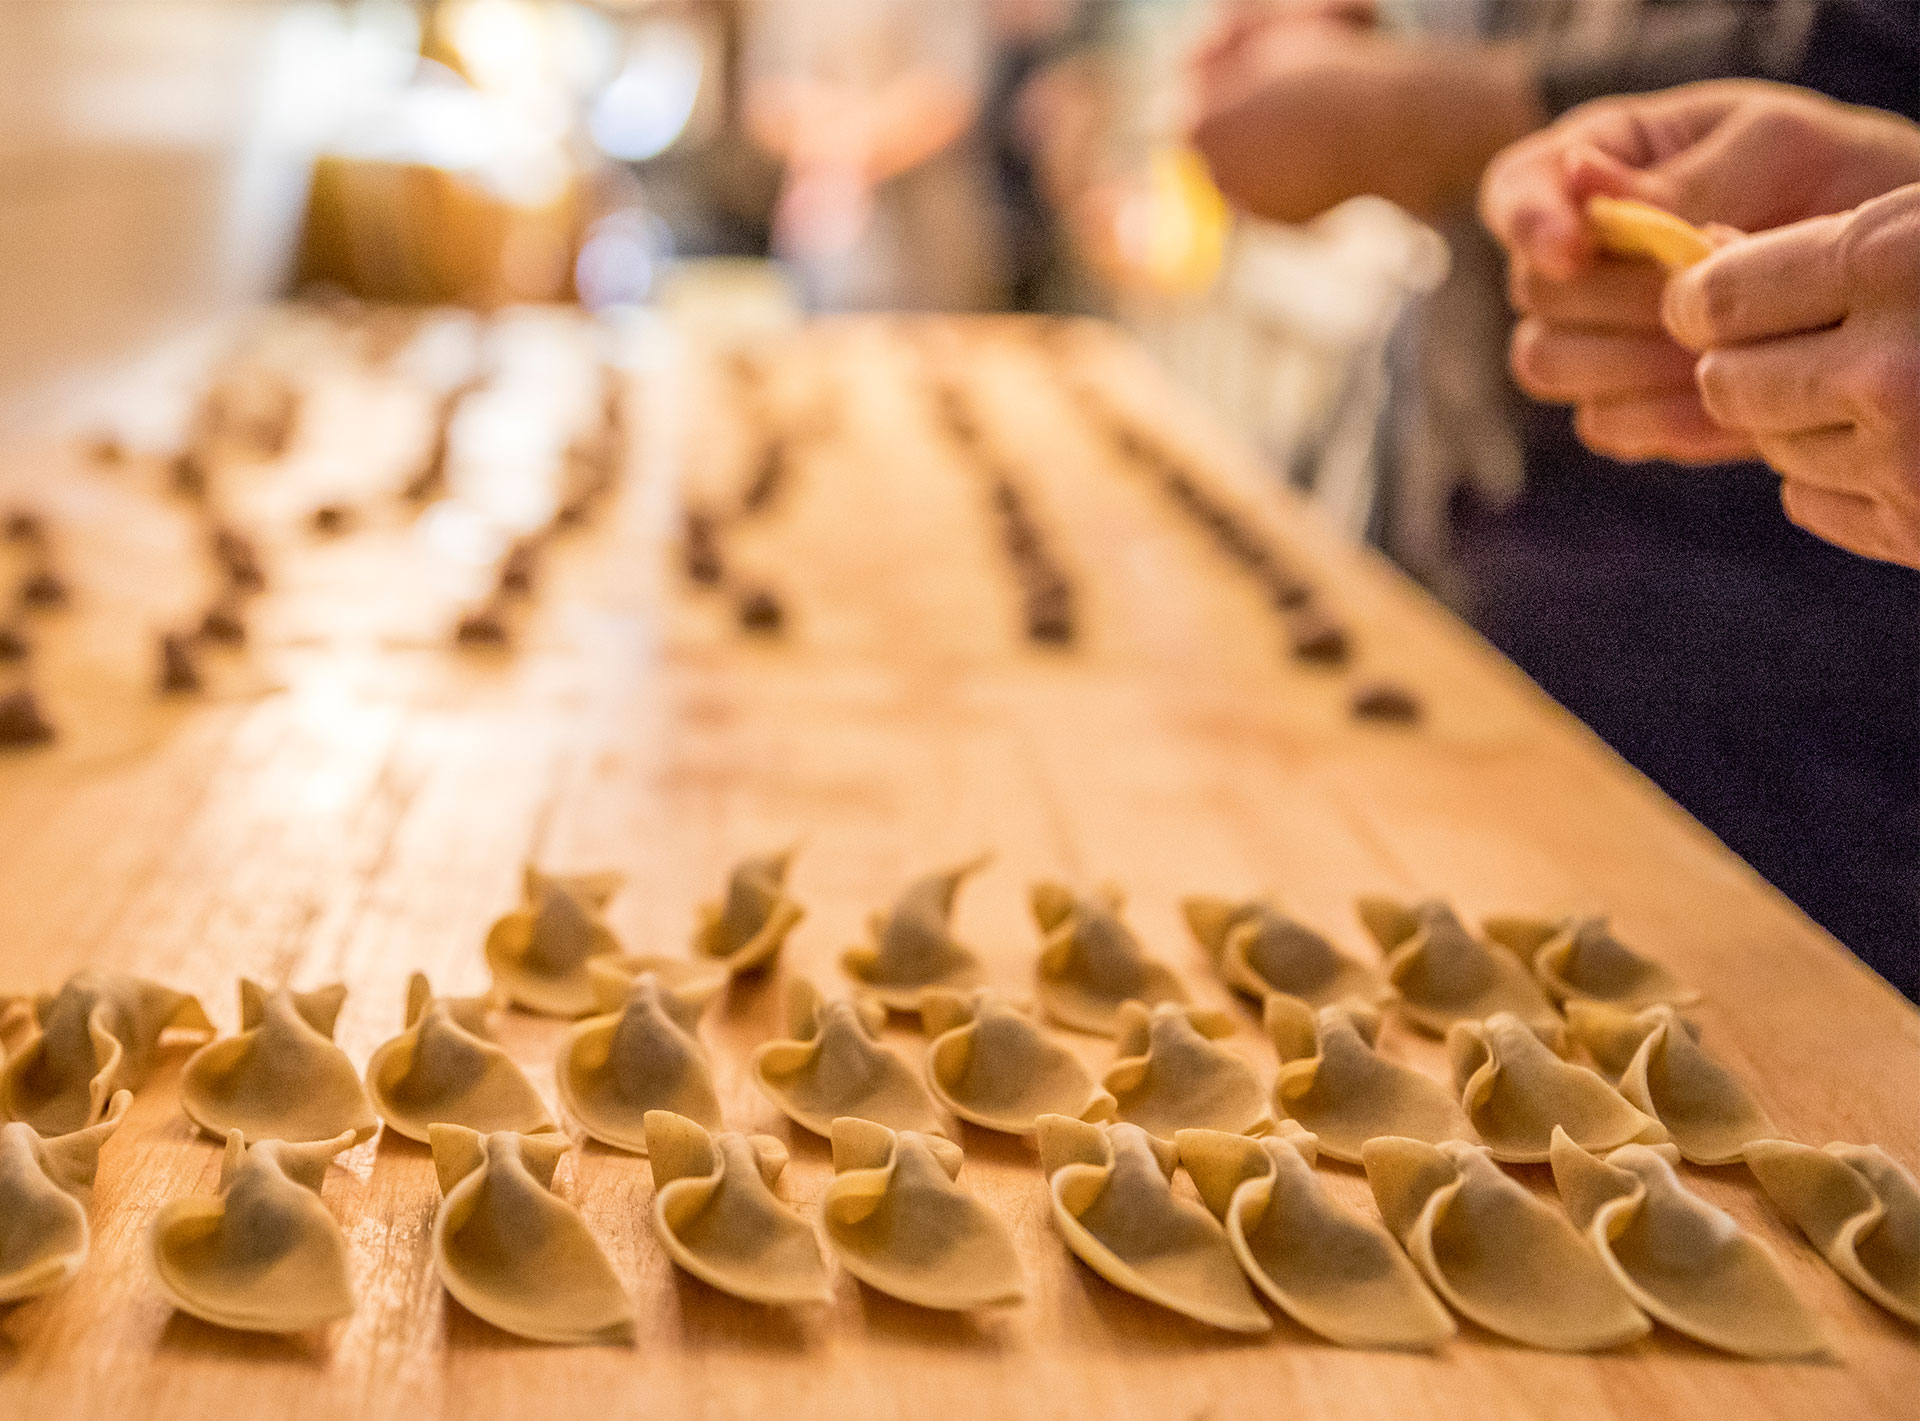 Handmade pasta being crafted at a wooden table in its fresh state